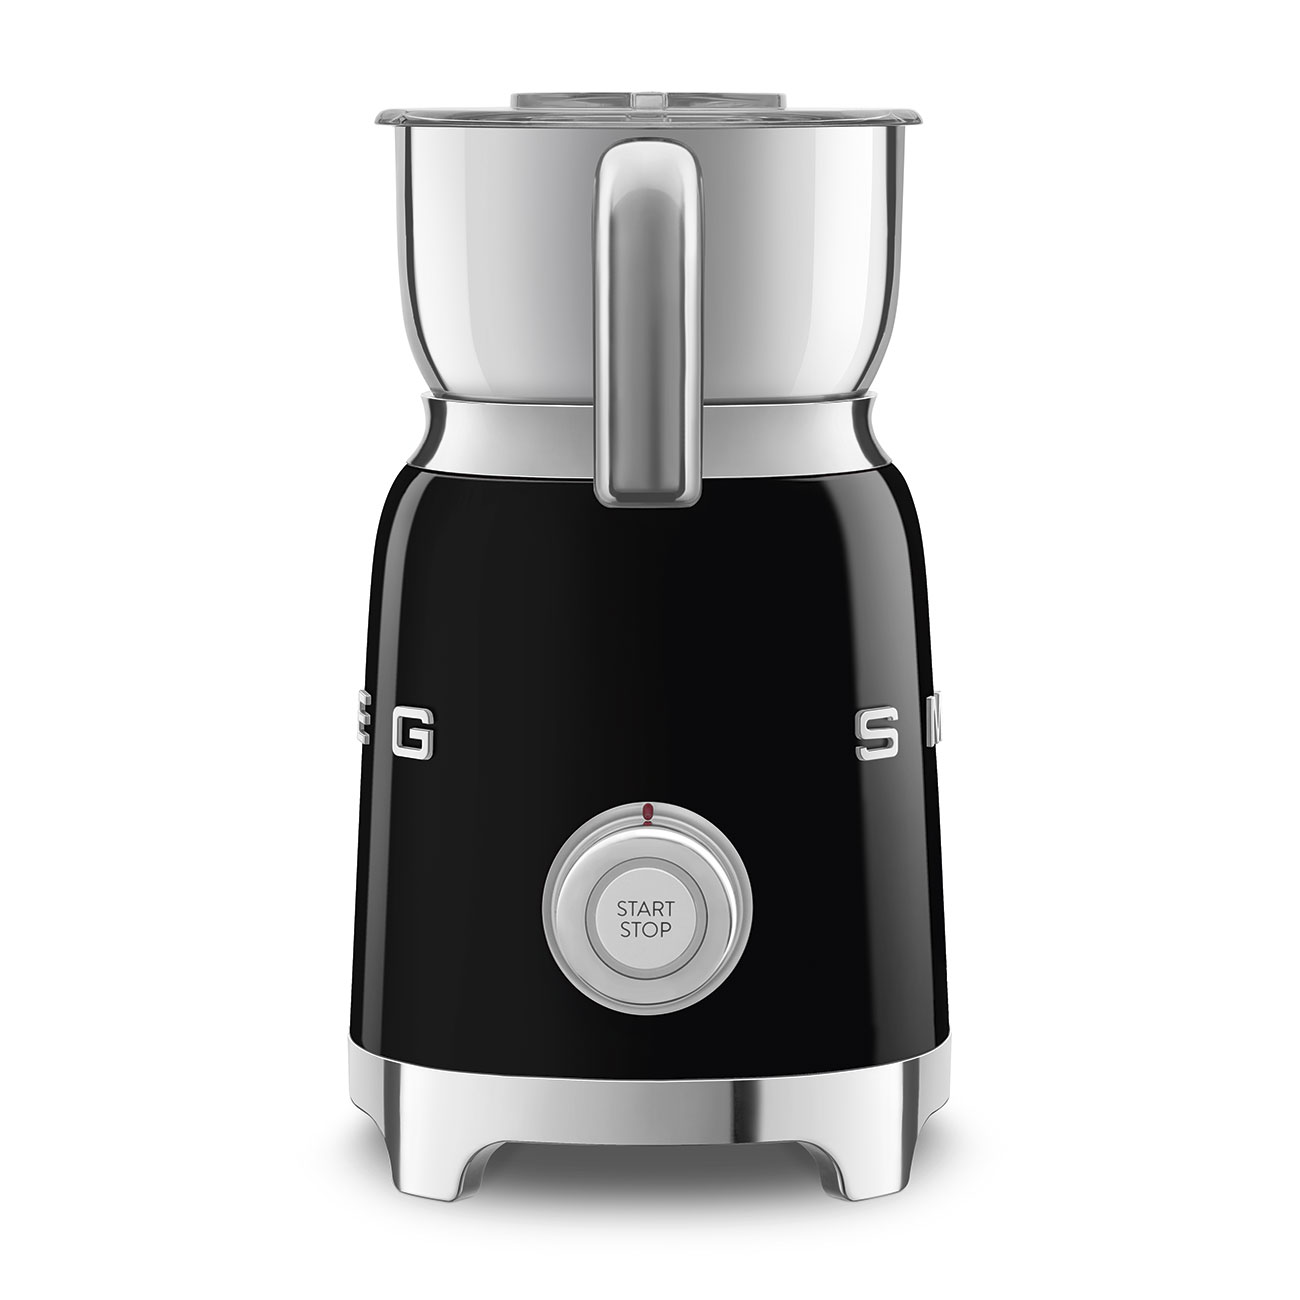 How to use the Smeg Milk Frother, MFF01